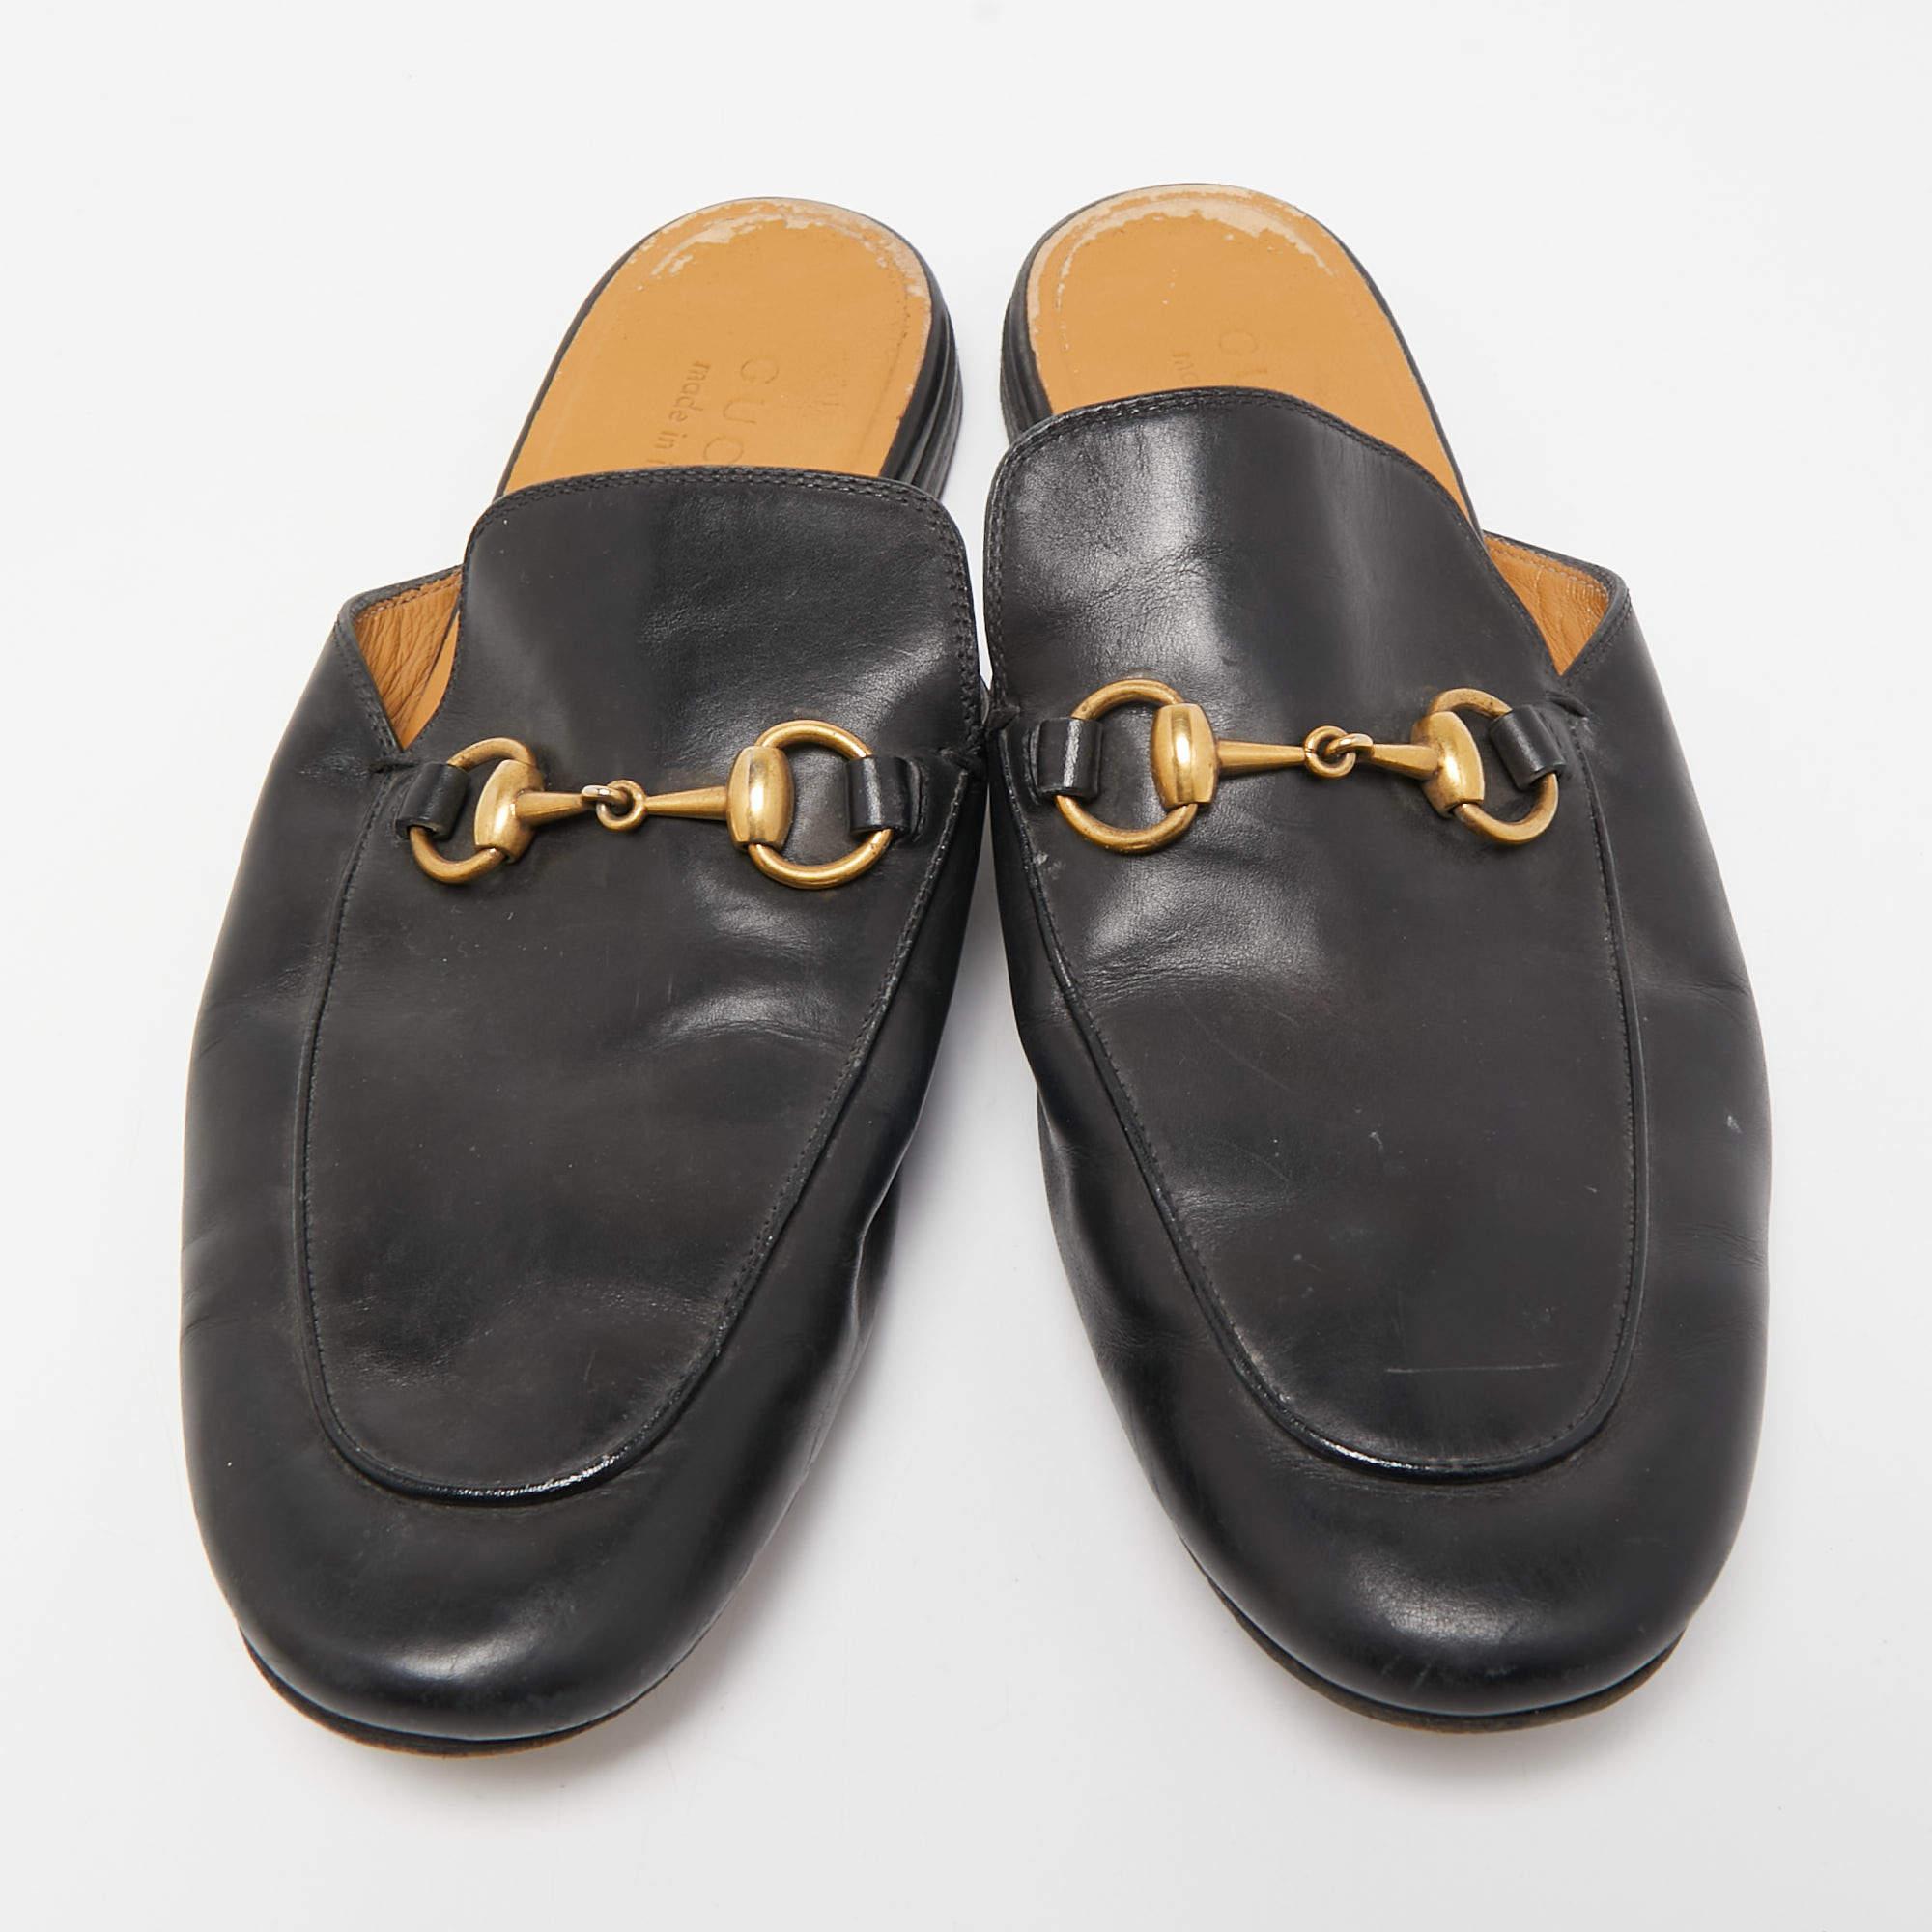 These Gucci Princetown mules signify luxury and practicality. An ultimate favorite of style enthusiasts, the Princetown's silhouette has the luxe touch of the Horsebit motif on the uppers. This pair comes made from leather.

